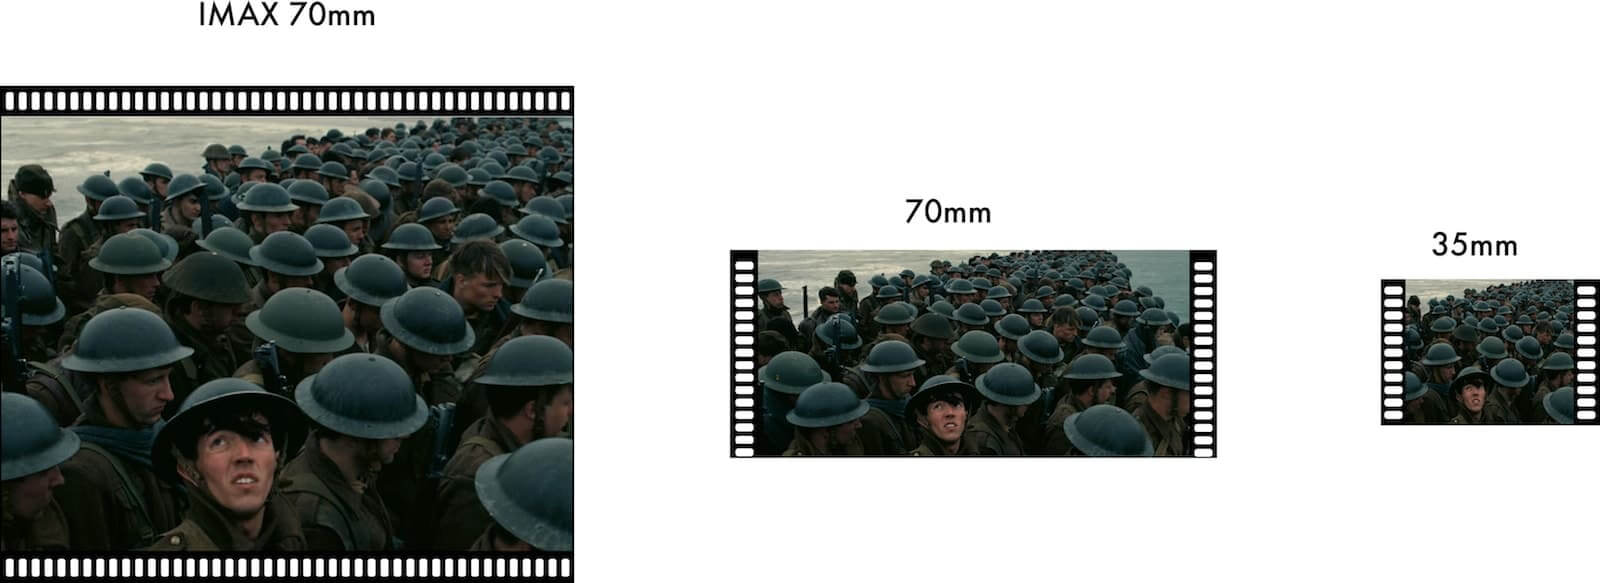 What is IMAX - IMAX 70mm film strips